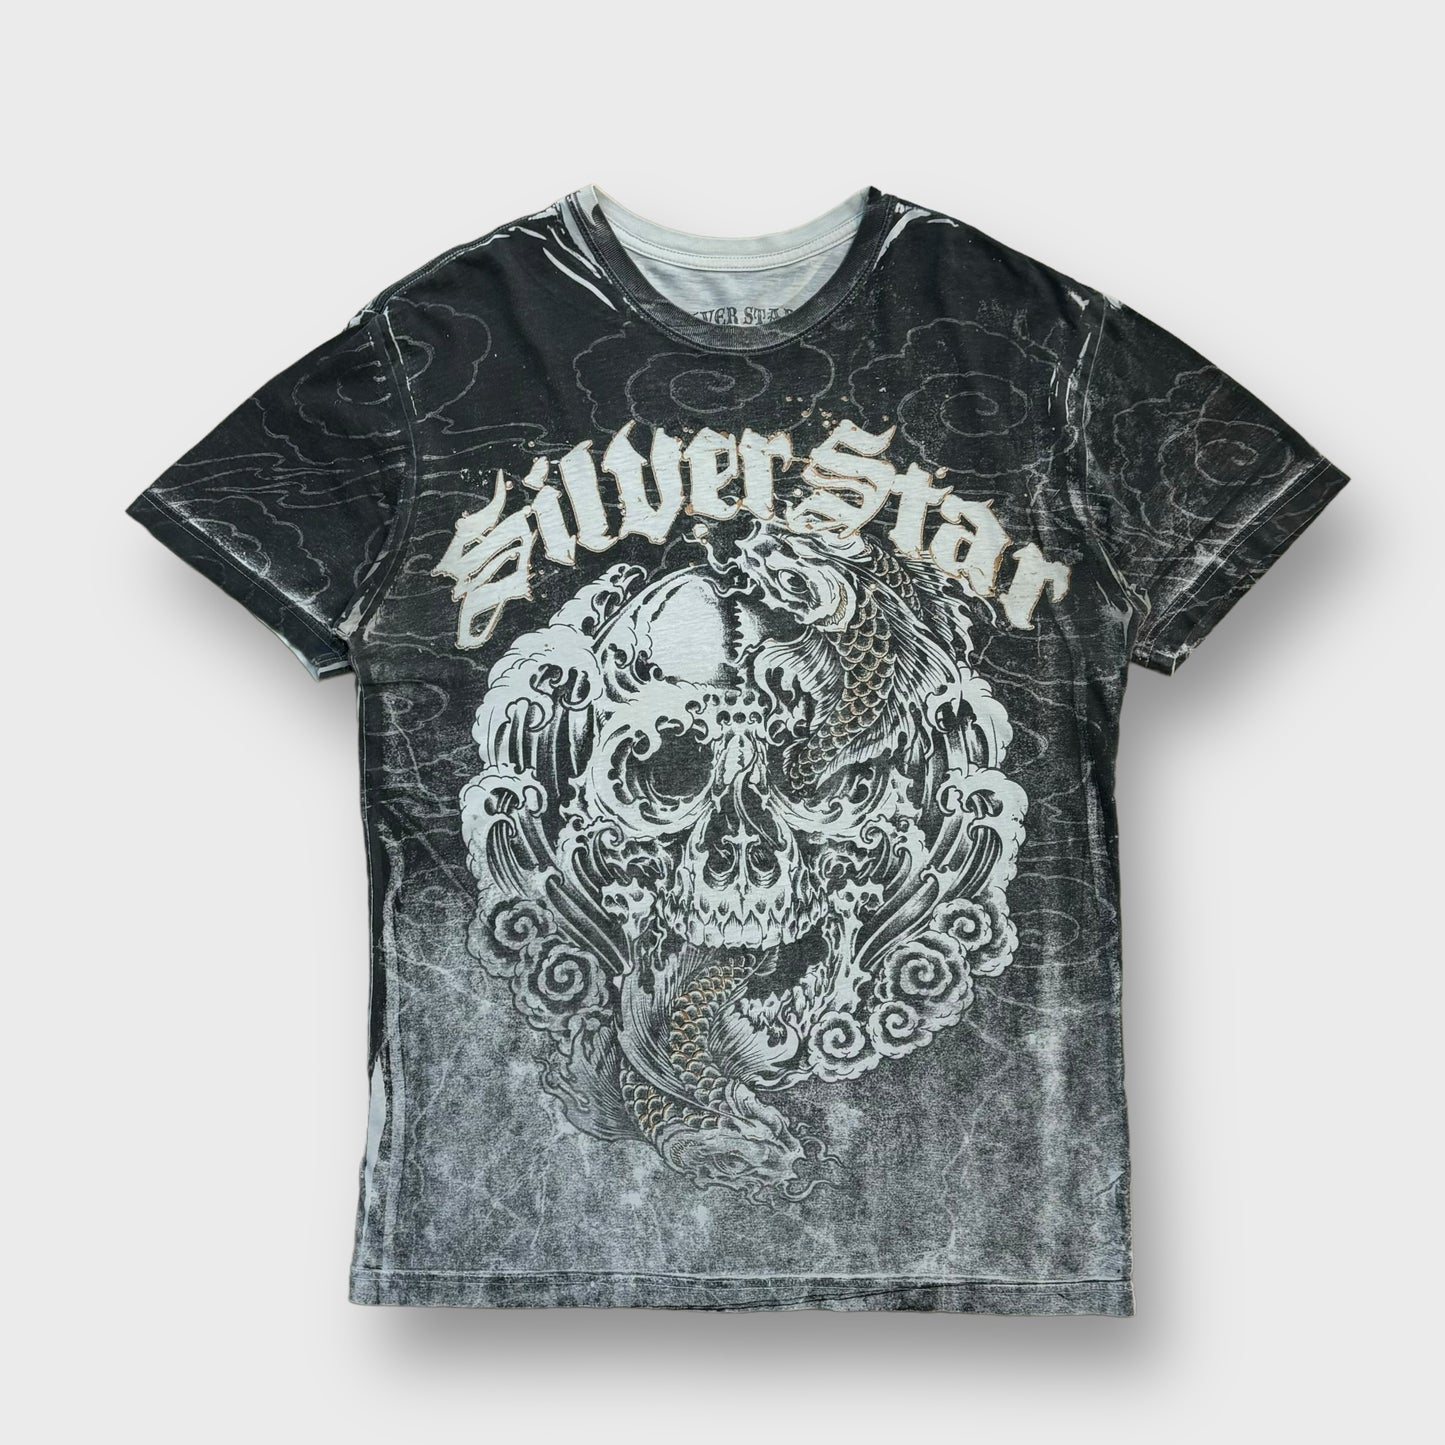 "SILVER STAR" graphic design t-shirt